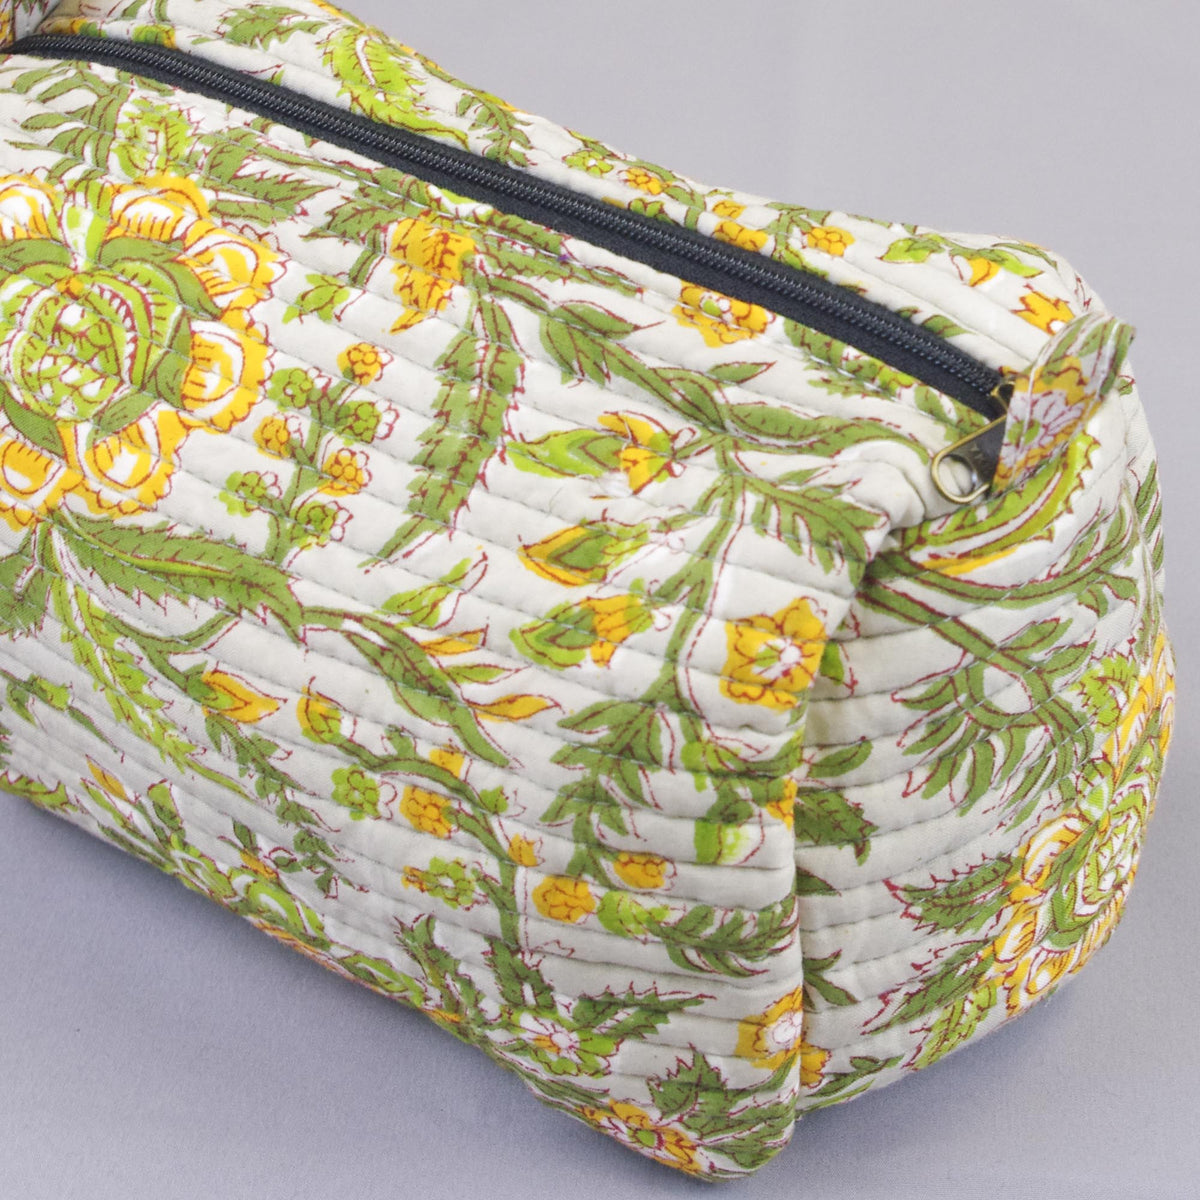 Block Print Makeup Pouch or Pencil Case- Yellow Green Vines